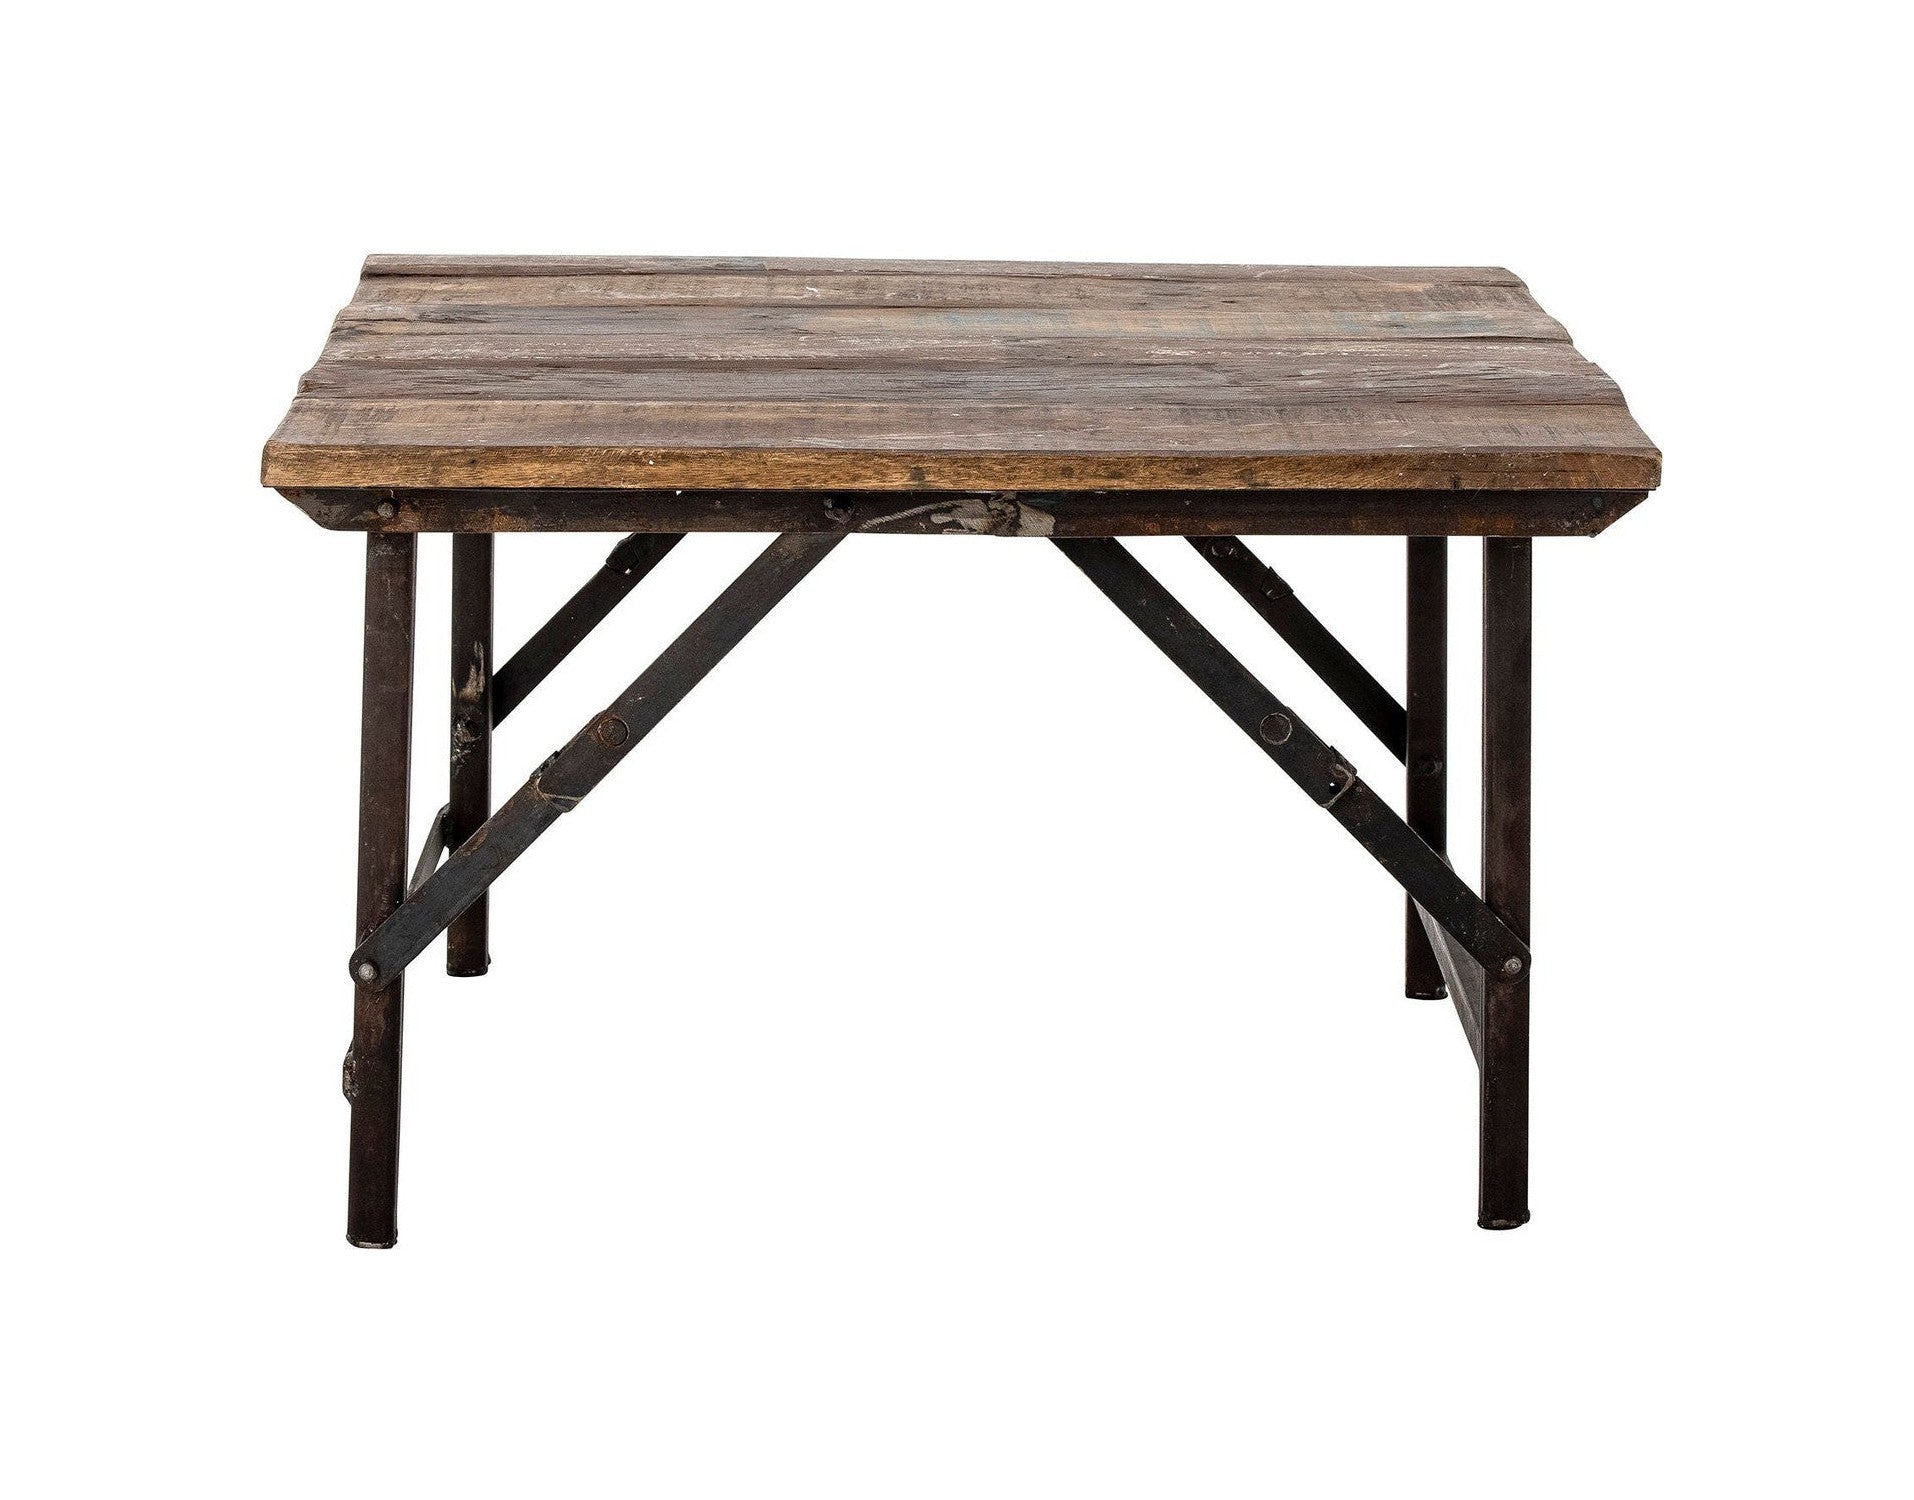 Creative Collection Loft Coffee Table, Brown, Reclaimed Wood